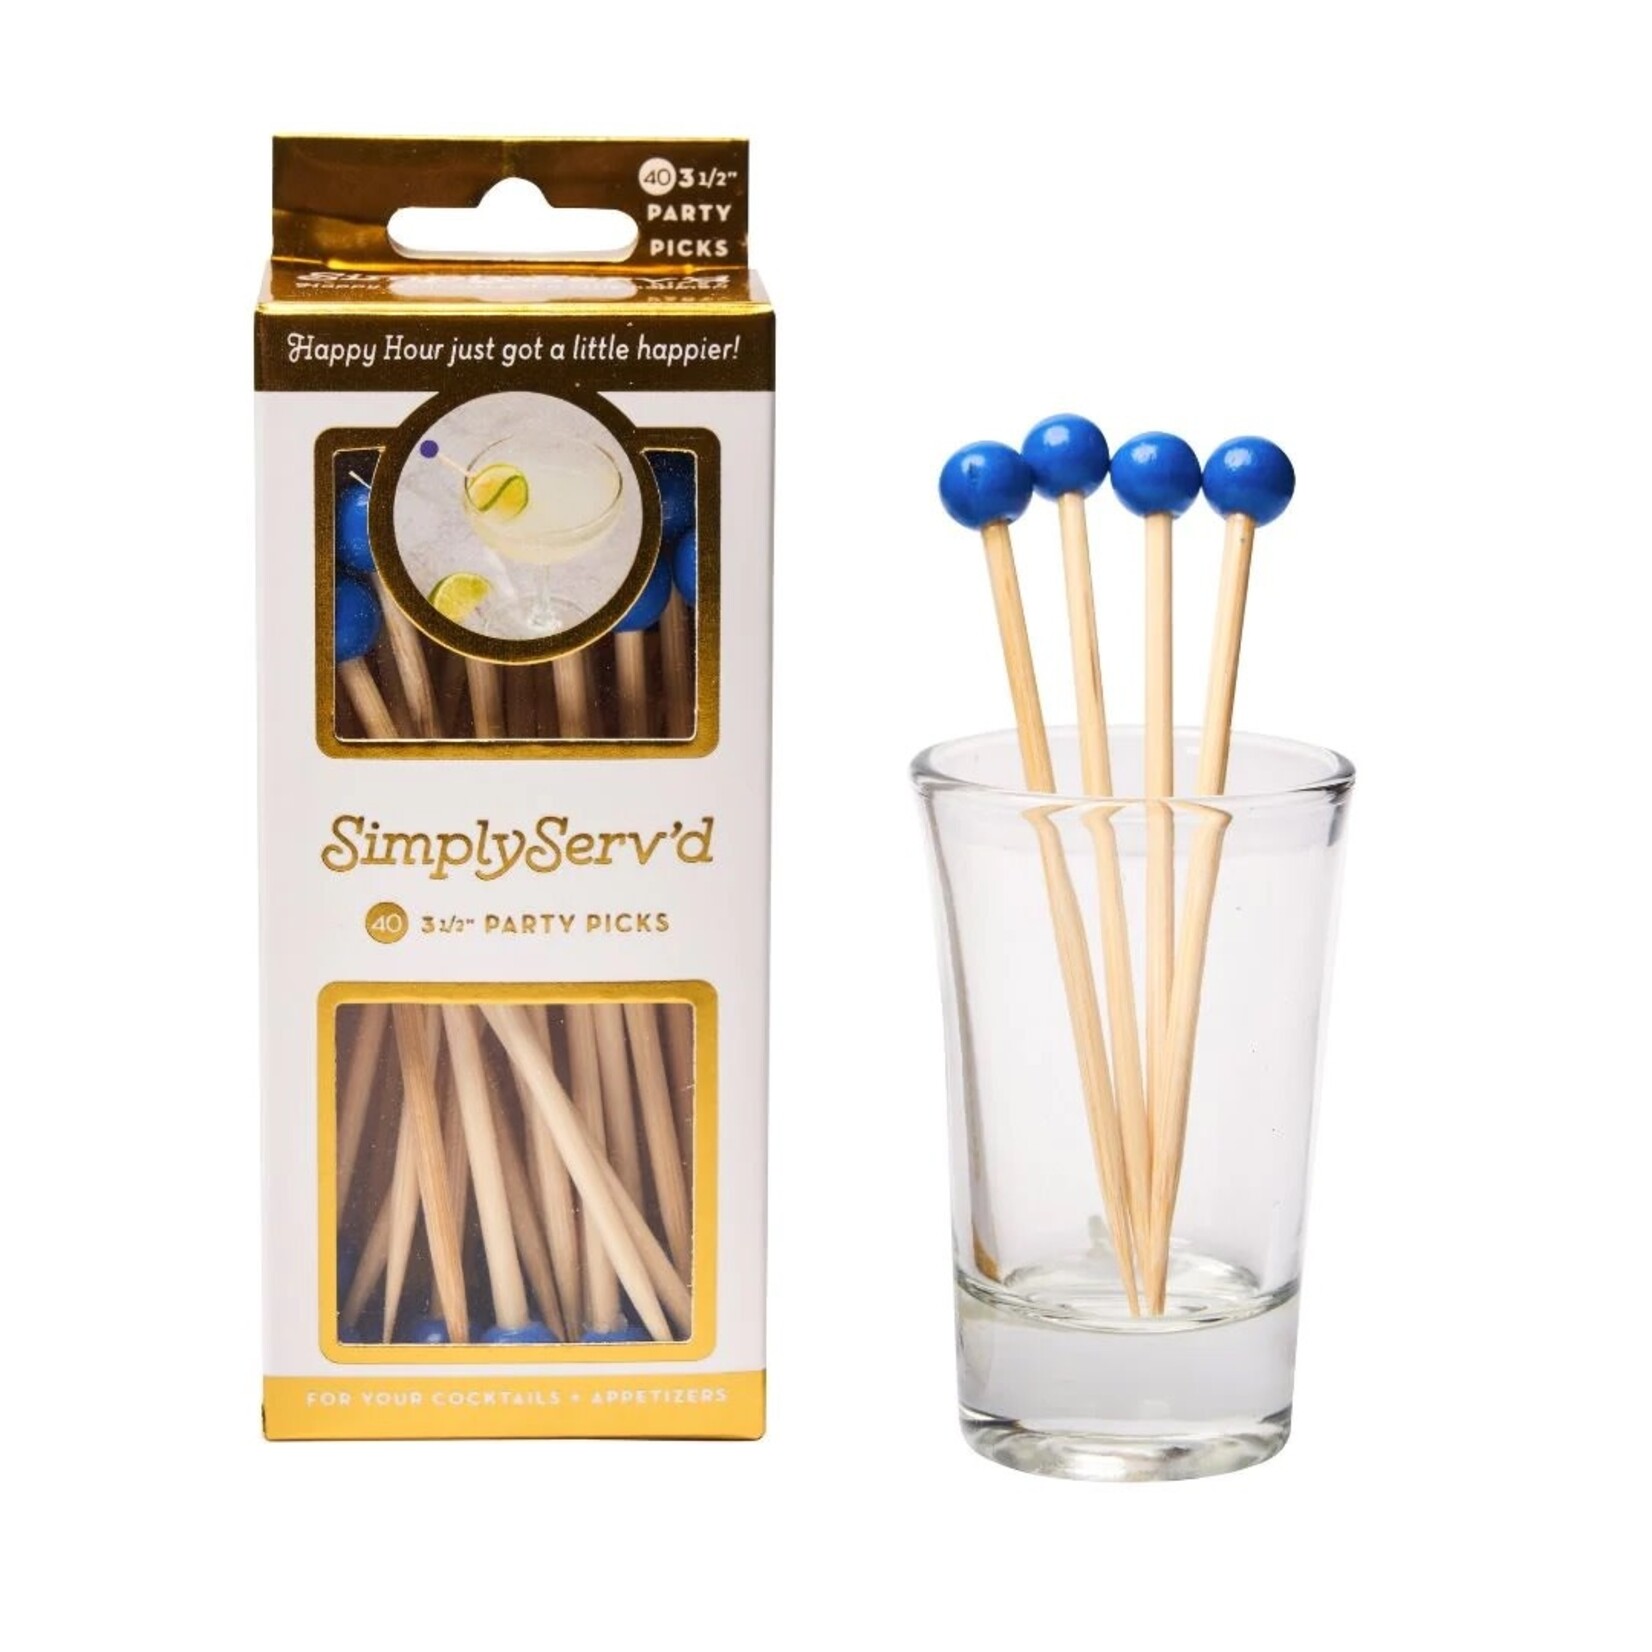 Sophistiplate/Simply Baked Party Pick Small Cobalt Blue/40pkg